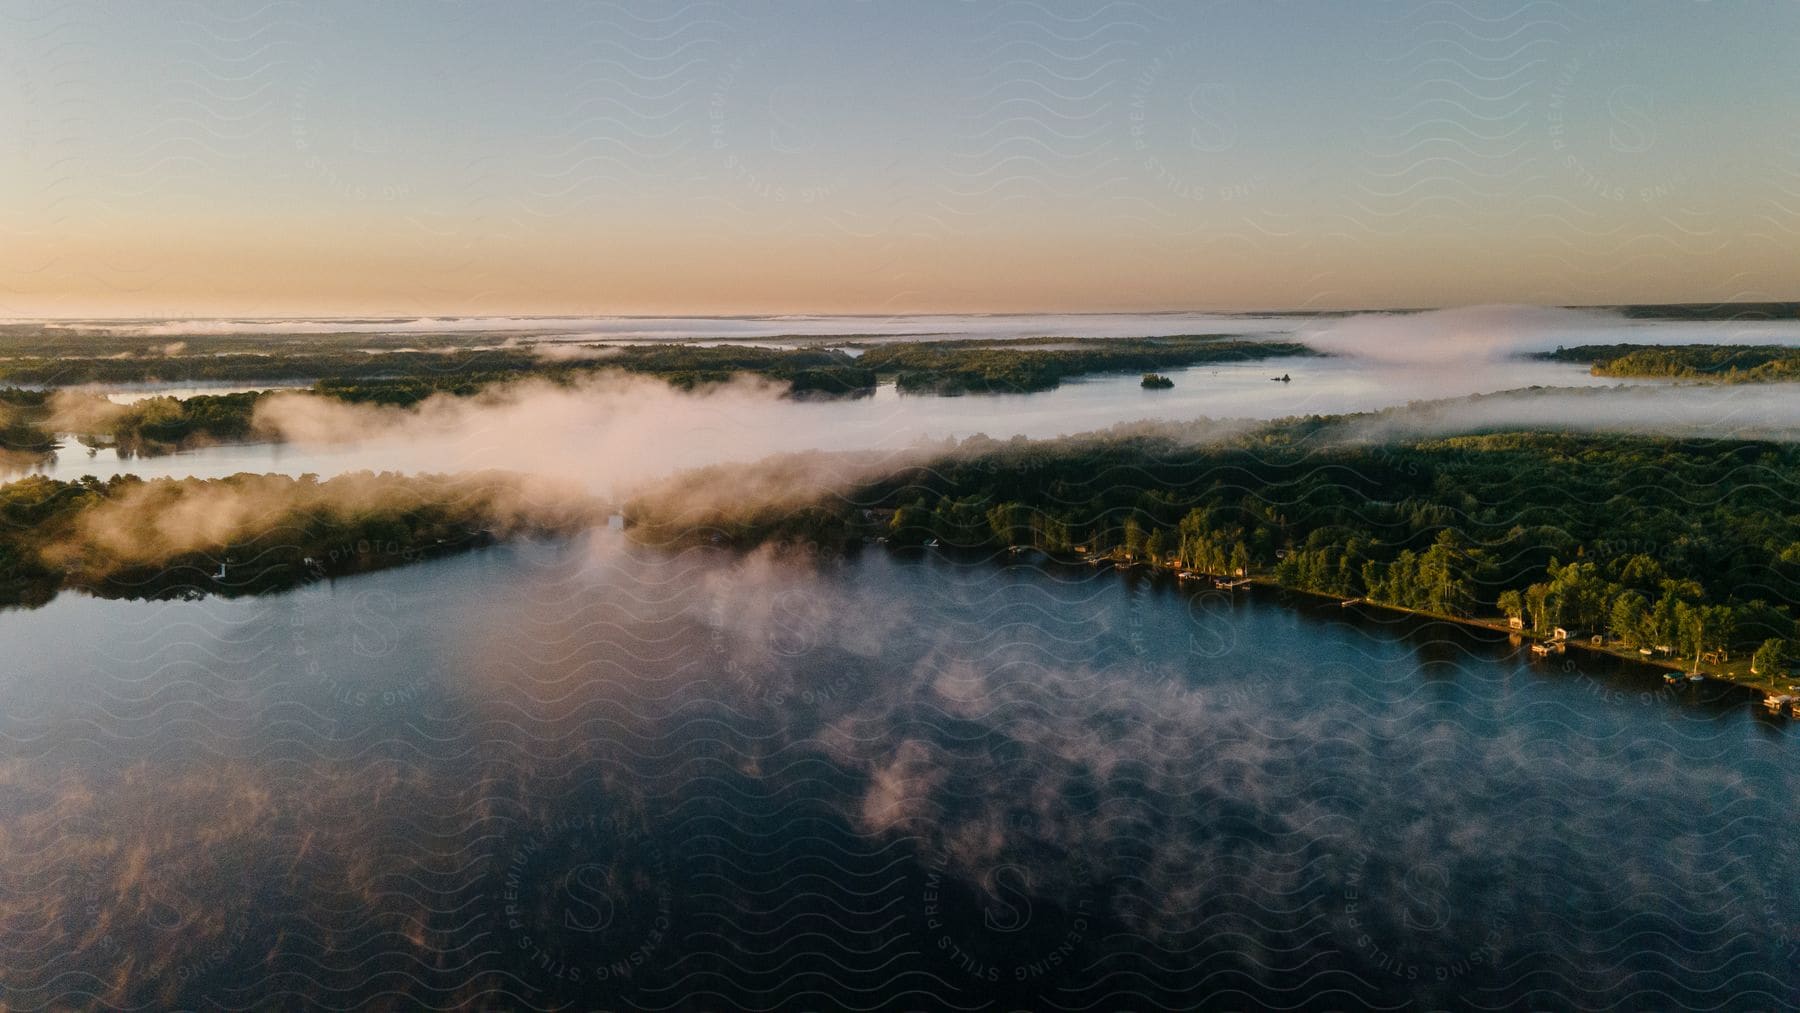 Fog partially covers trees near the shoreline of a river at sunrise in the wisconsin north woods